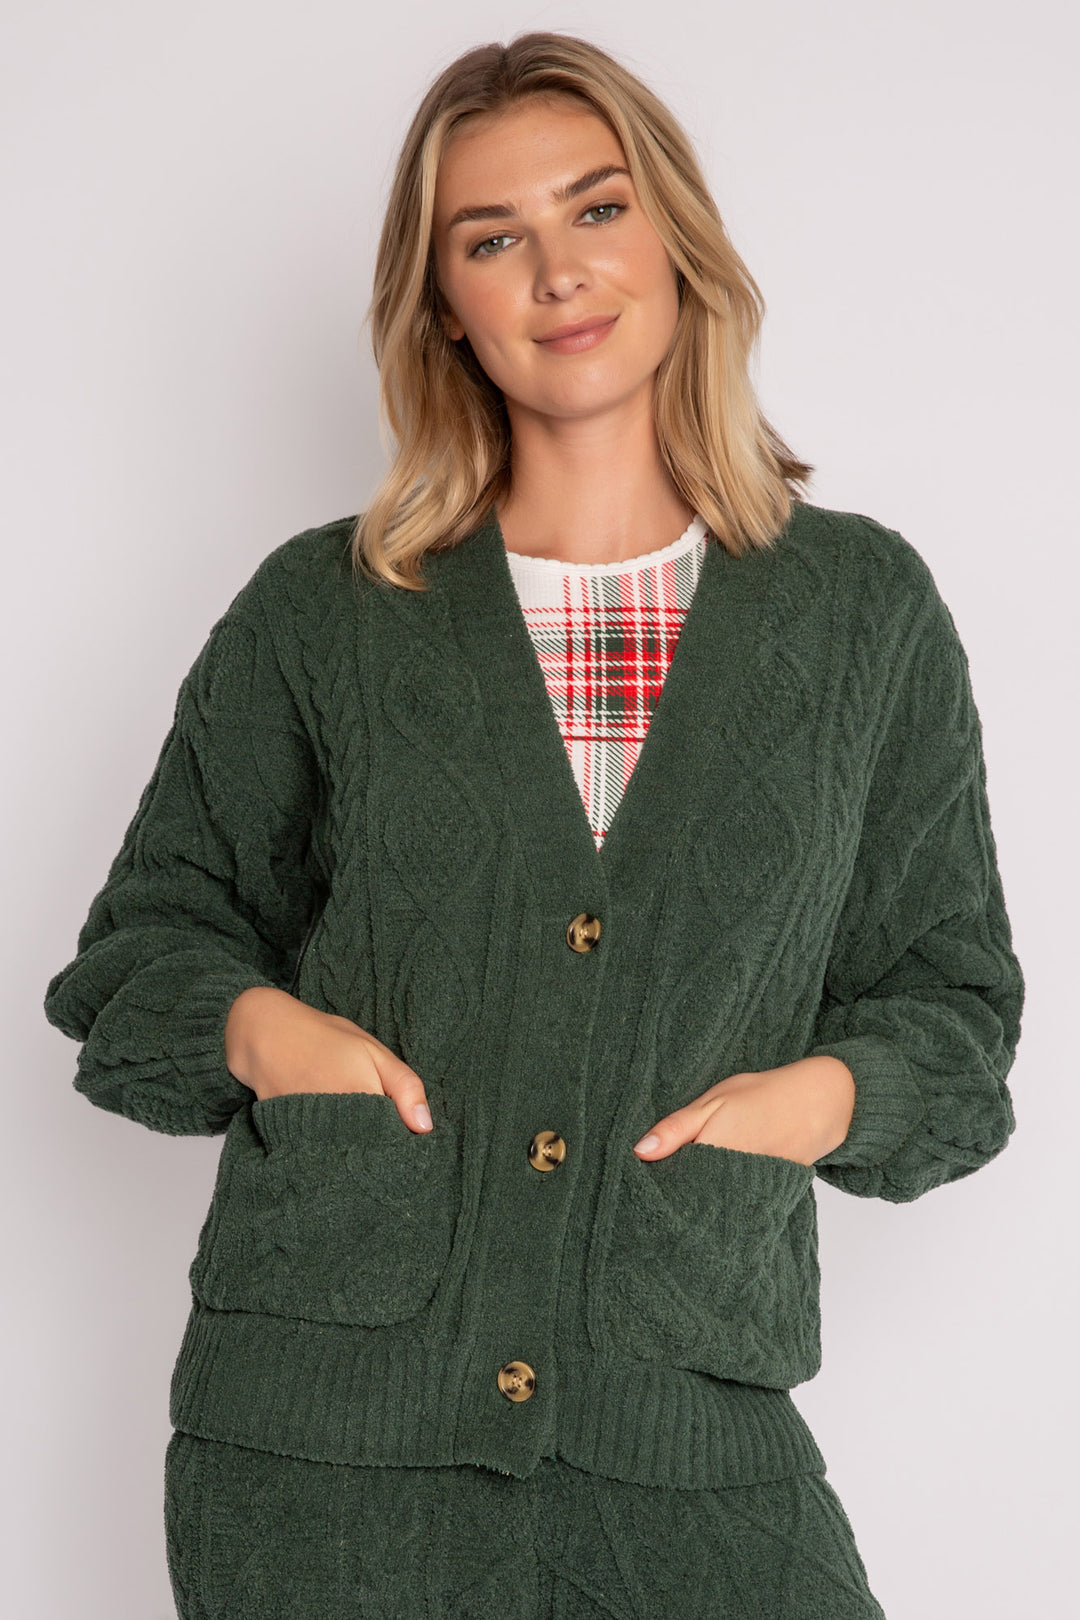 Cardigan sweater in green chenille knit cable pattern. Two lower front pockets & 3-button closure. (7257679298660)